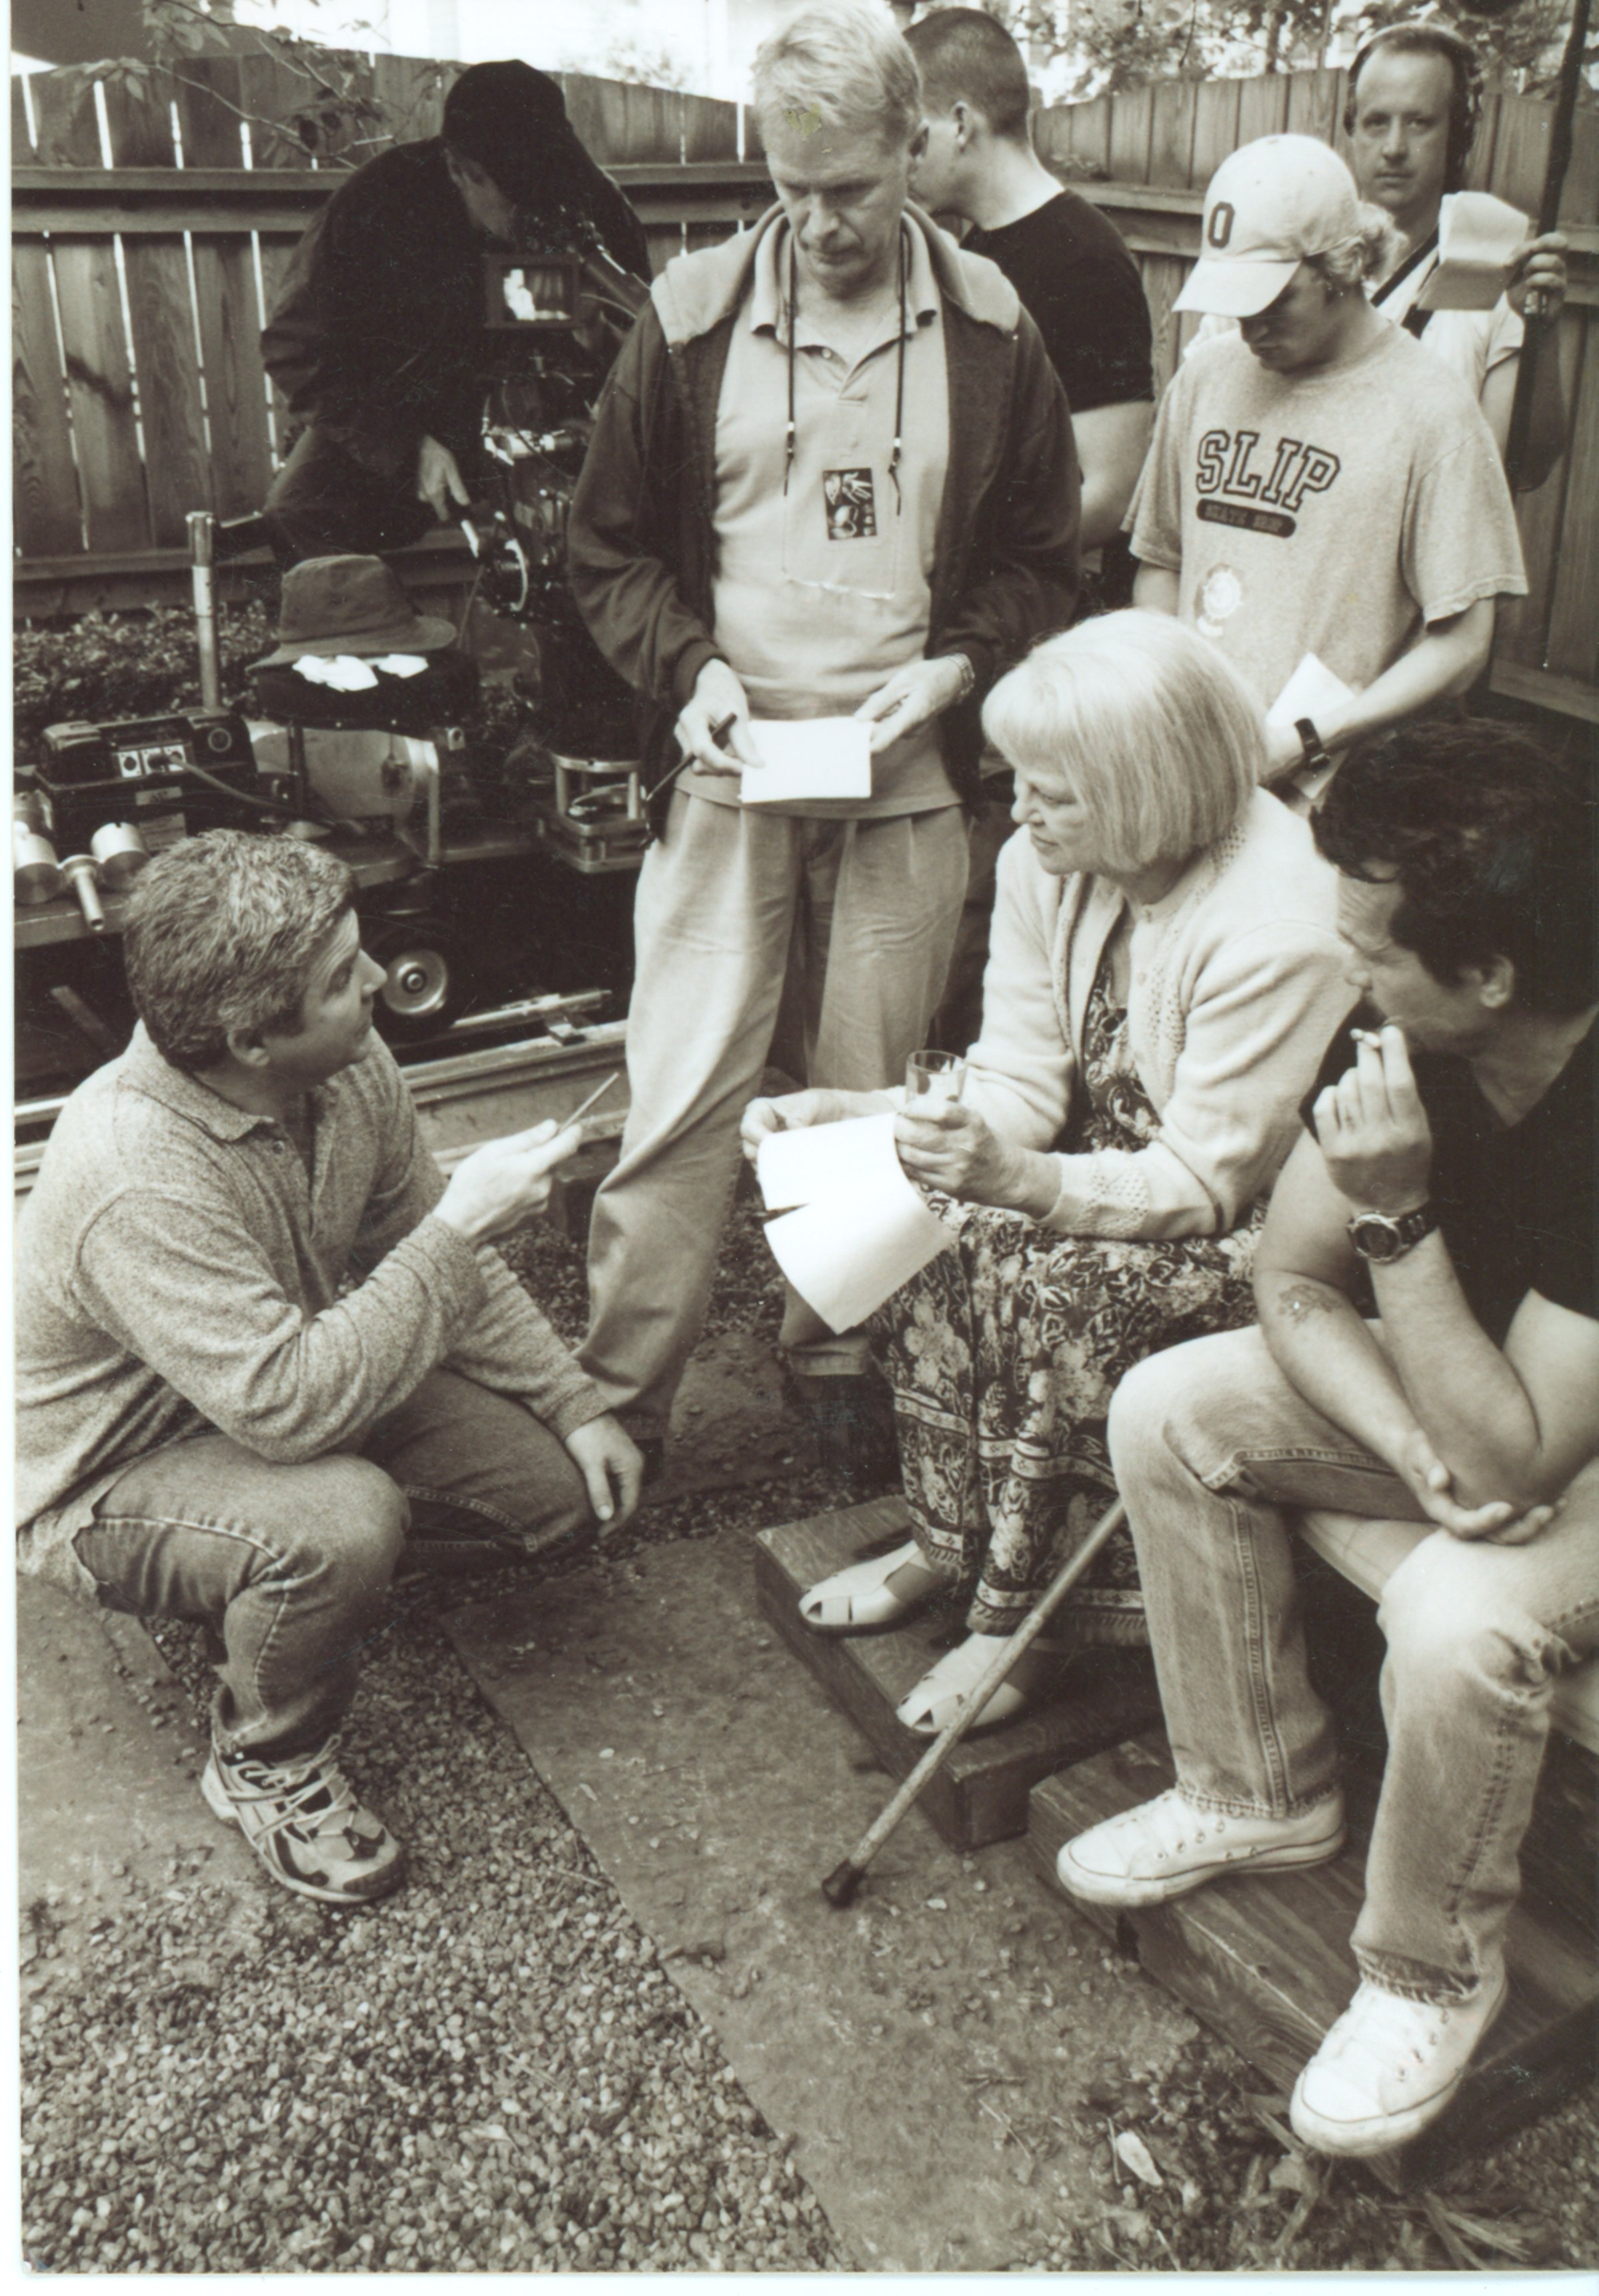 Director Robert Manganelli discusses a scene with cast and crew